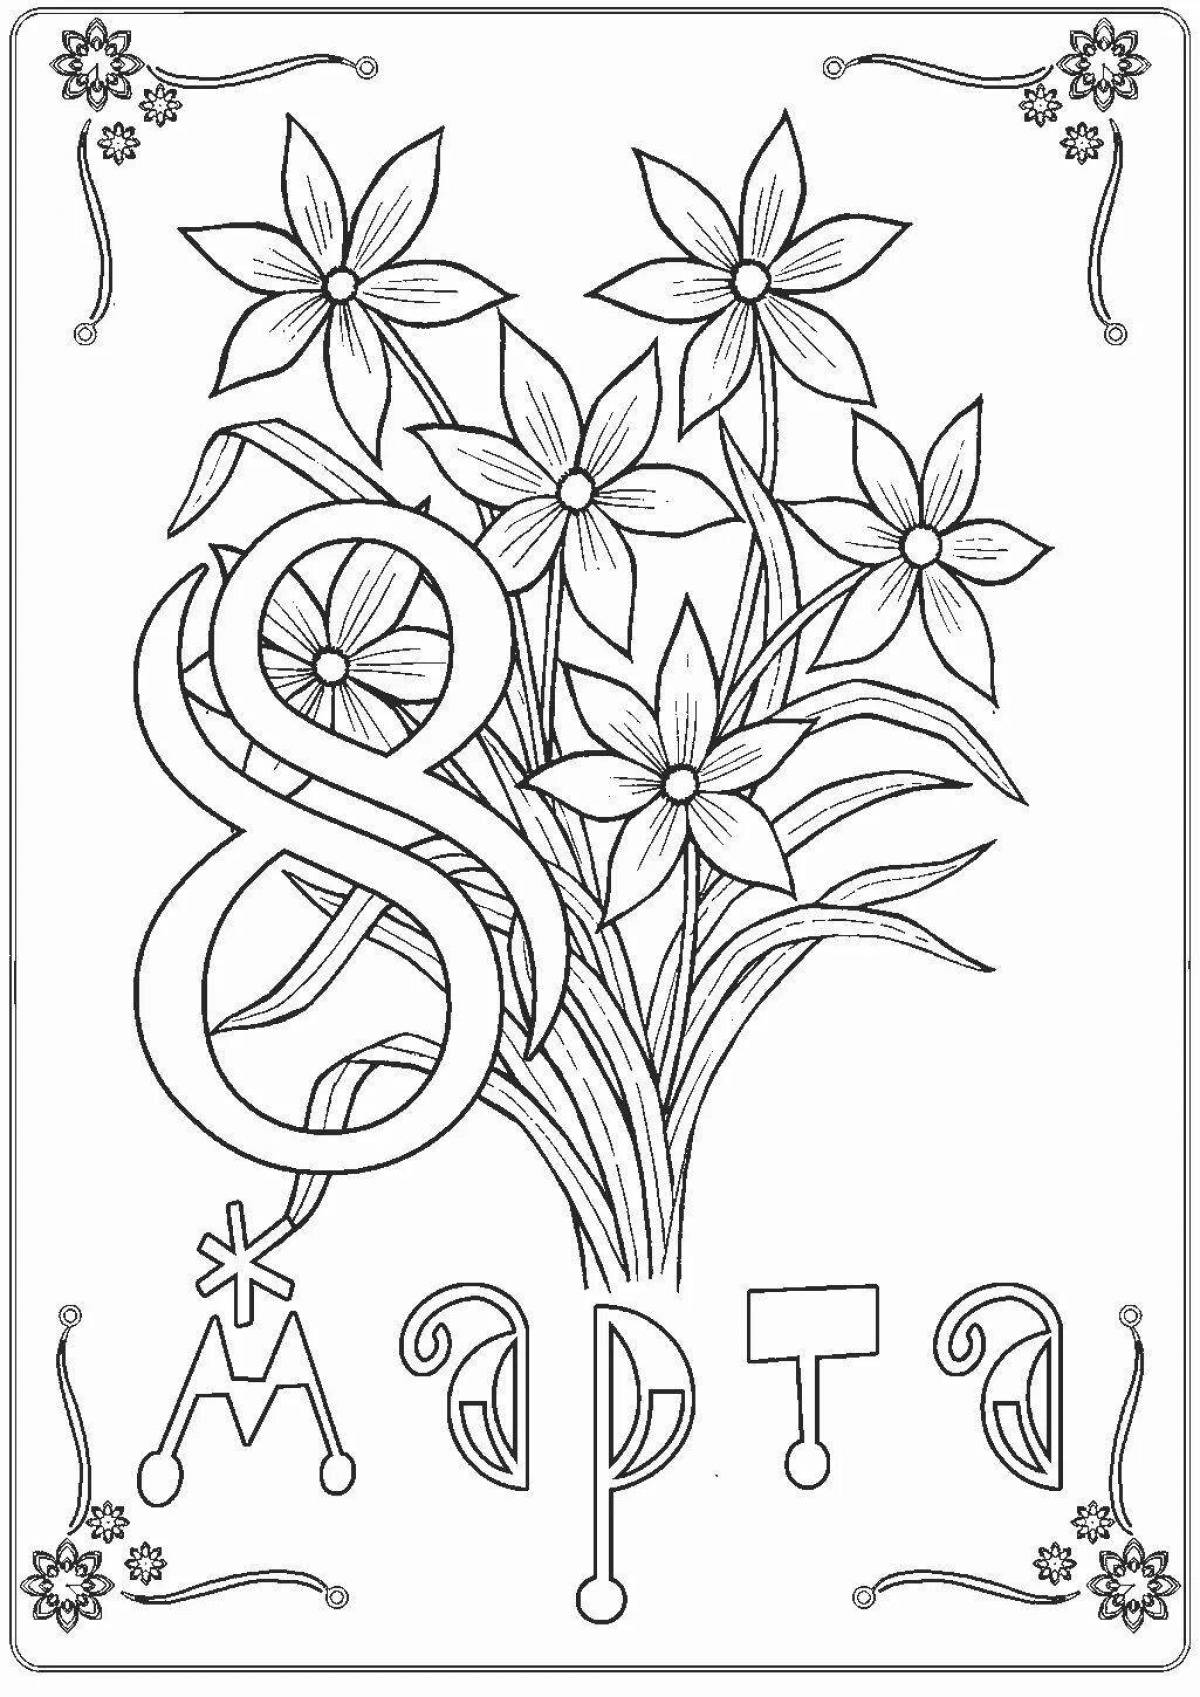 Joyful March 8 coloring book for kids